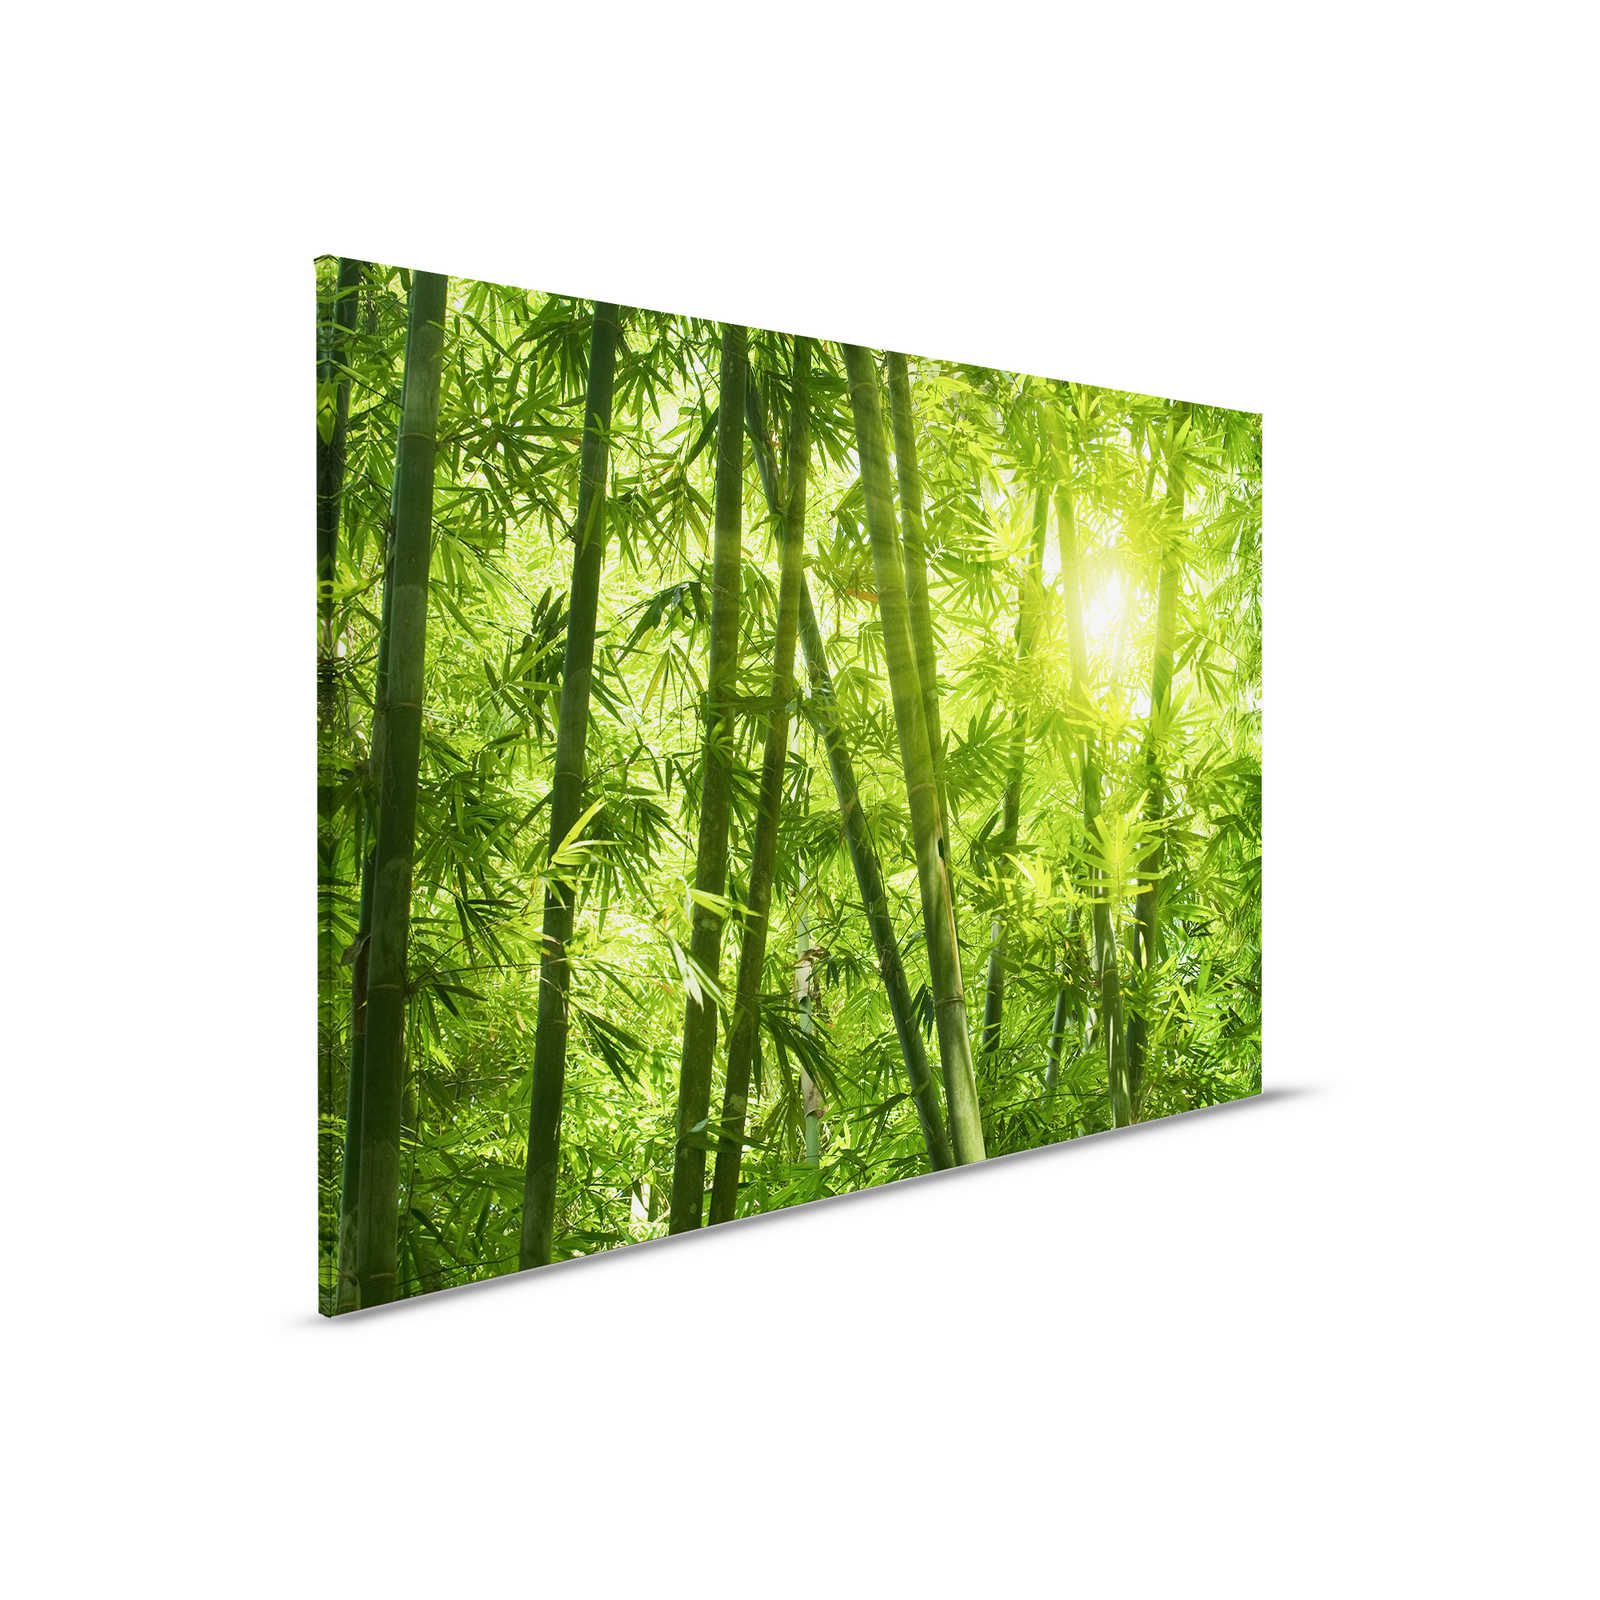         Canvas painting Bamboo and Leaves - 0,90 m x 0,60 m
    